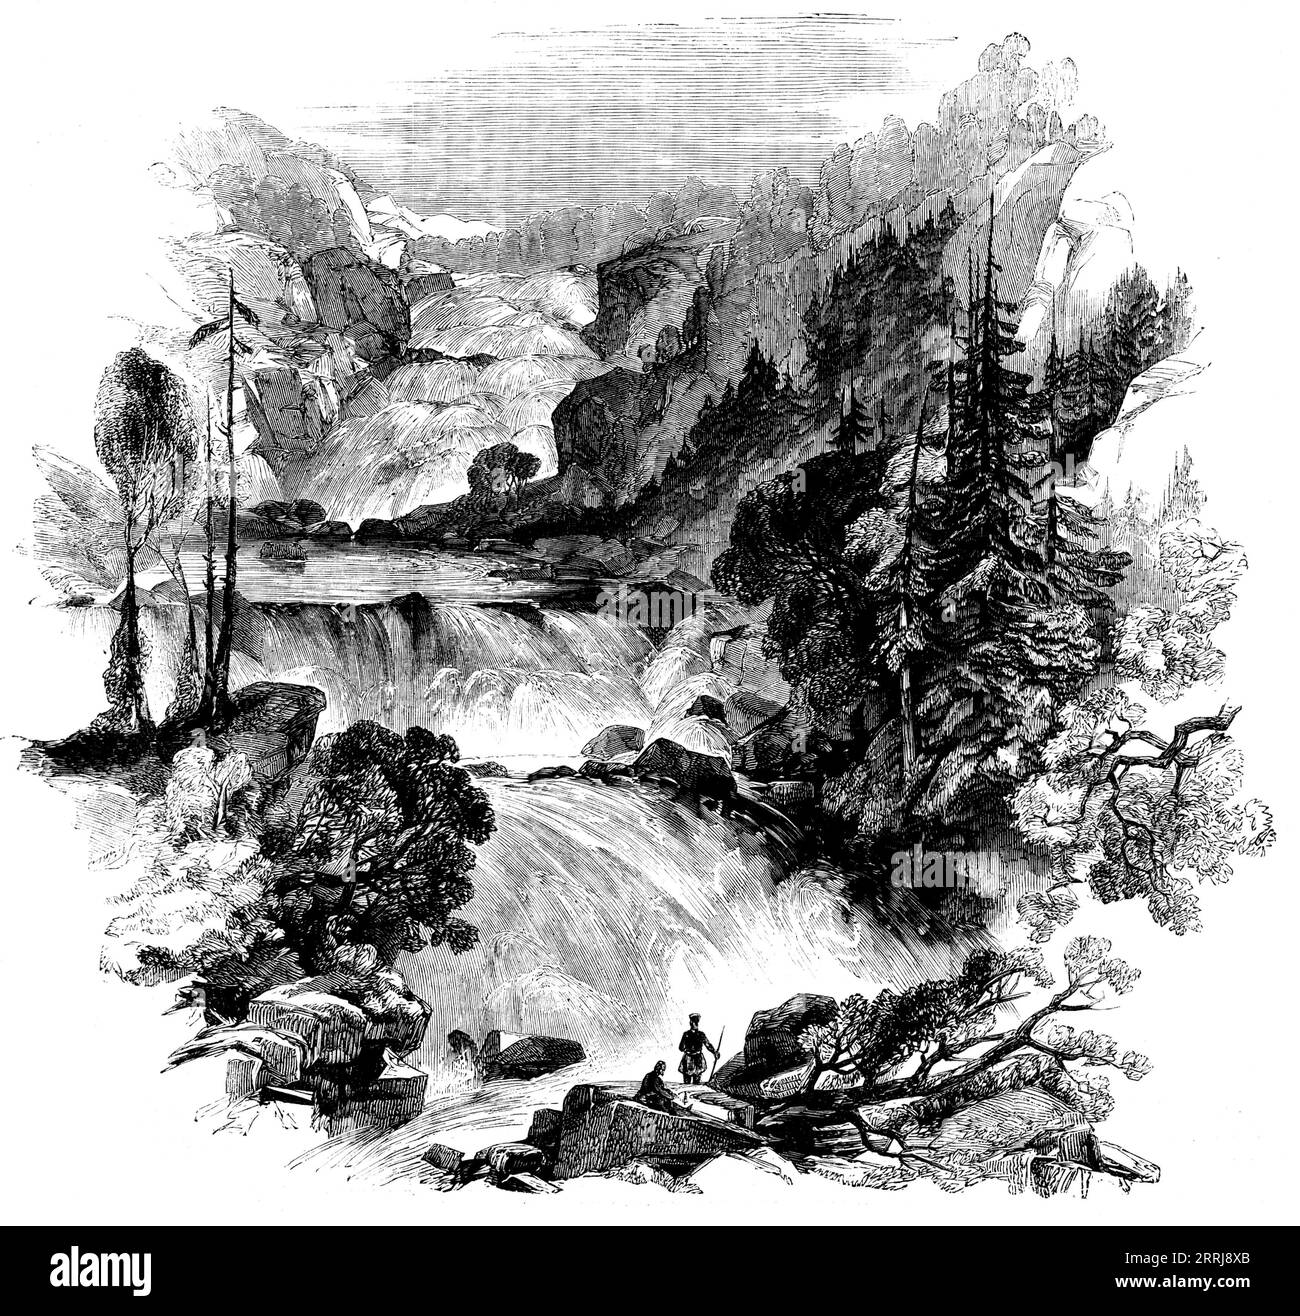 The Canadian Red River Exploring Expedition - Great Falls on Little Dog River, at Great Dog Portage, 1858. 'The Falls in the accompanying Sketch, by Mr. Fleming, assistant to Mr. Hind, lie some distance to the west of the beginning of the Great Dog Portage, one of the most formidable barriers on the canoe route between Lakes Superior and Winnipeg. The Great Dog Portage rises 468 feet above Little Dog Lake, into which the water, passing over the Falls...rushes with a wild, indescribable beauty from Great Dog Lake, north of the barrier just noticed. The difference in the level of Little and Grea Stock Photo